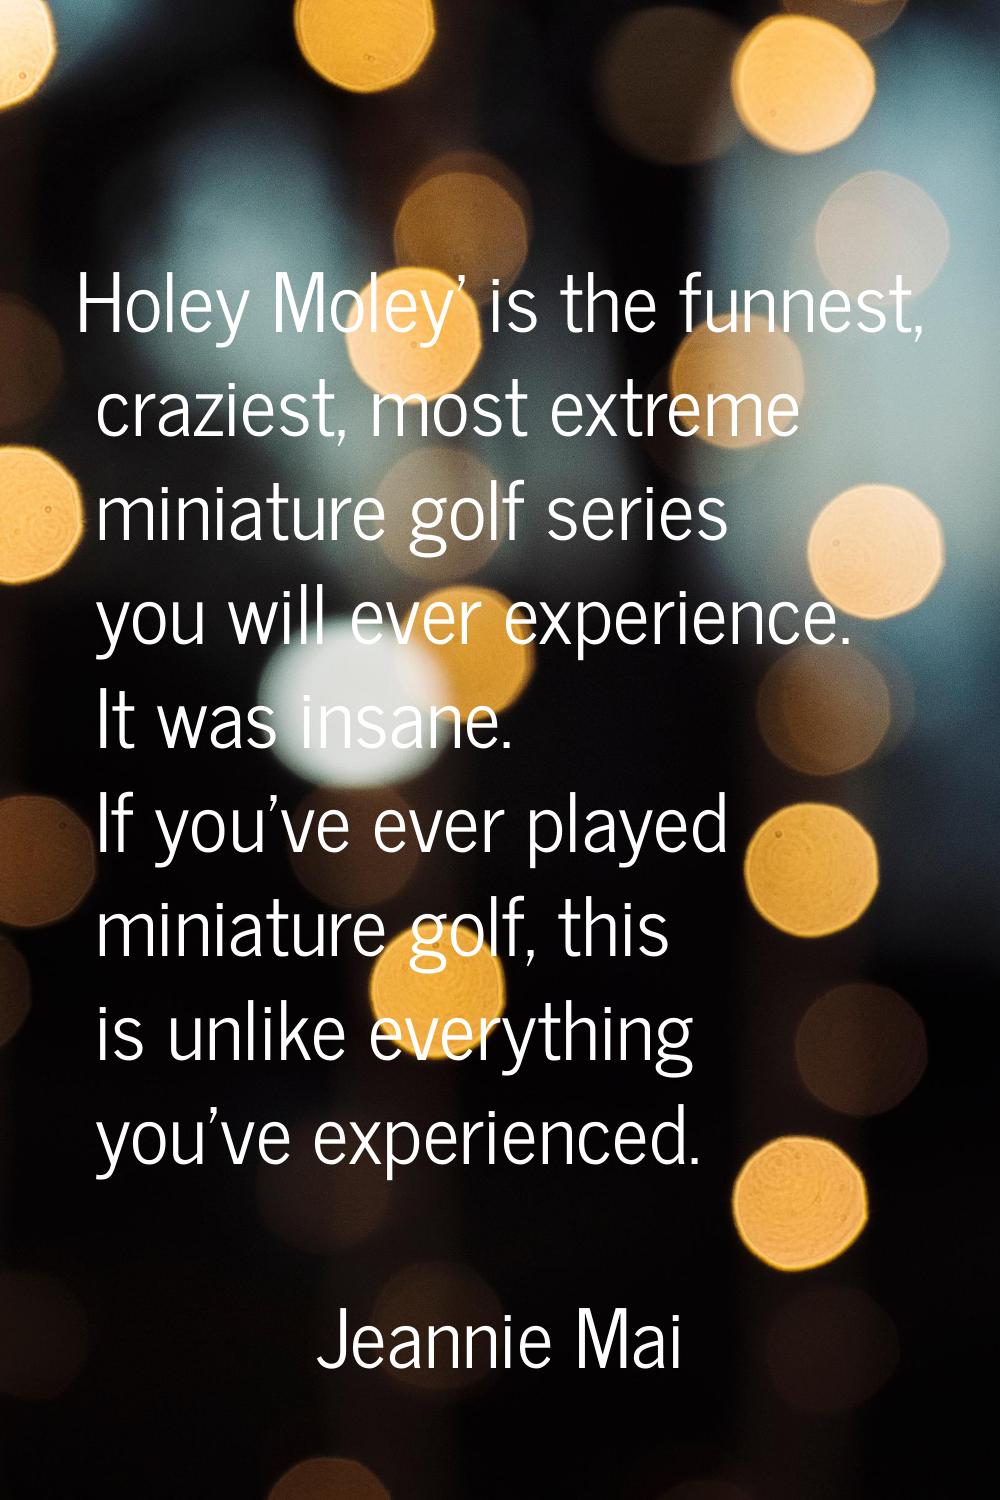 Holey Moley' is the funnest, craziest, most extreme miniature golf series you will ever experience.